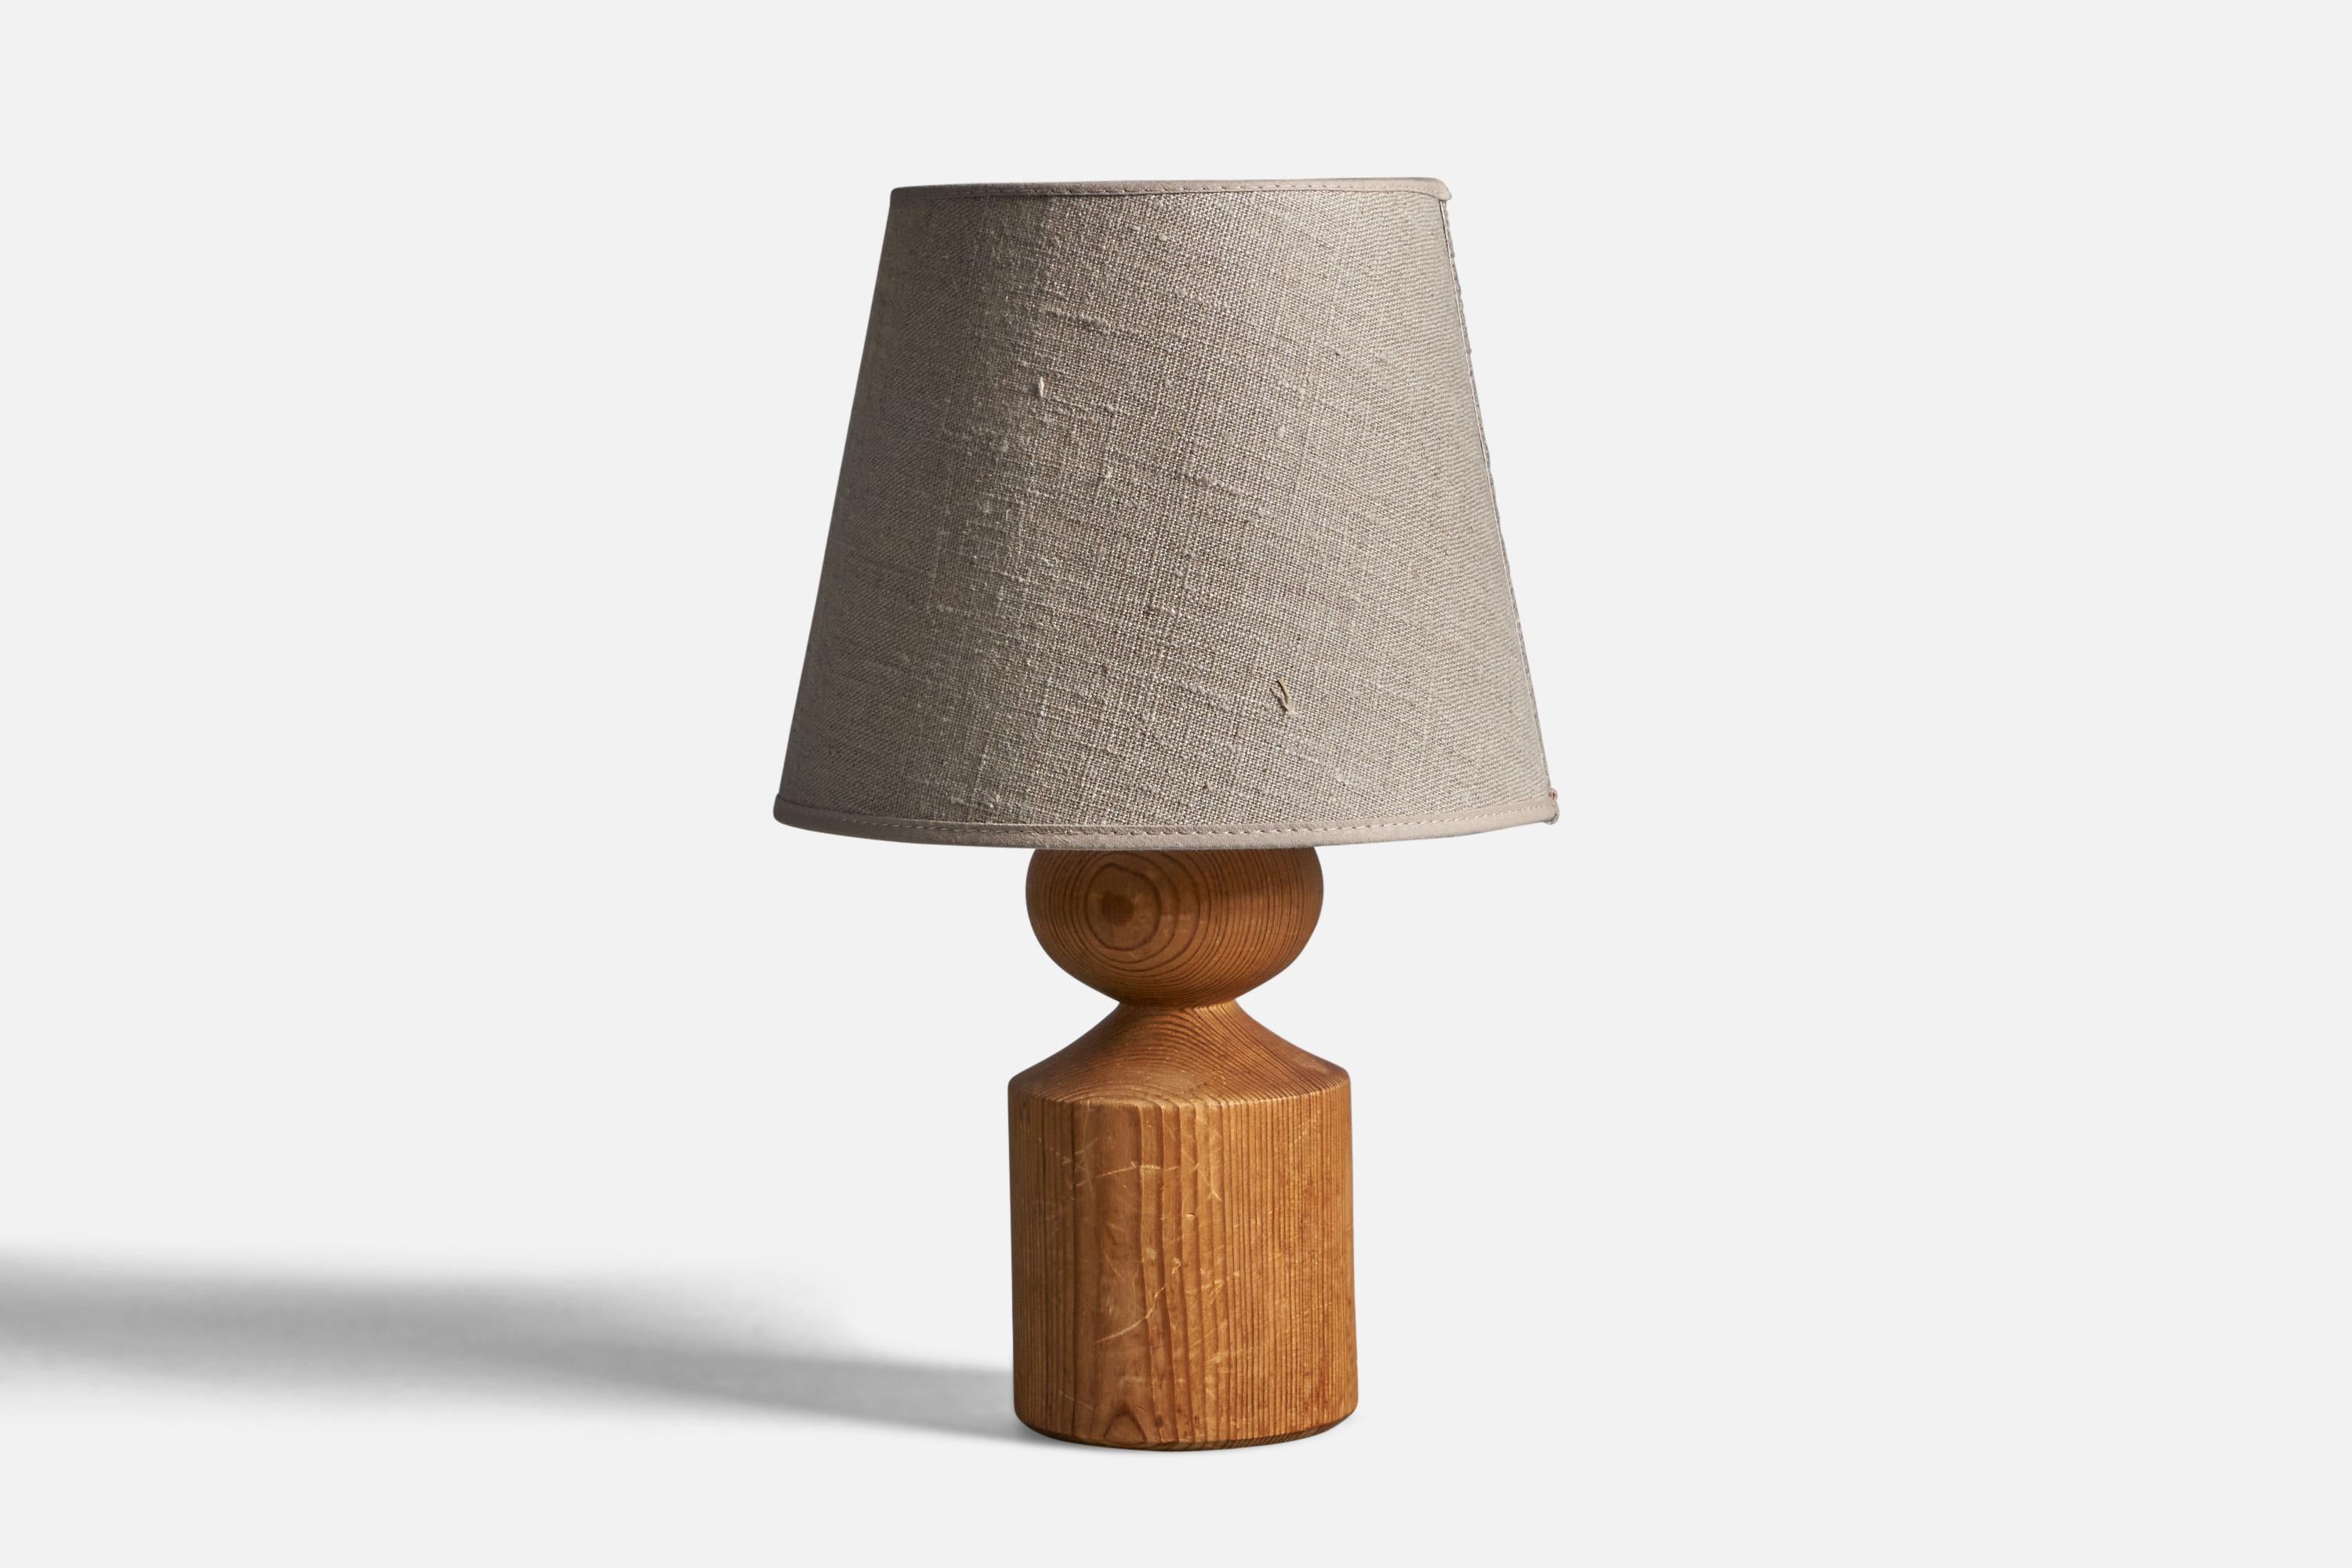 A pine and beige fabric table lamp designed and produced in Sweden, 1970s.

Overall Dimensions (inches): 13.25